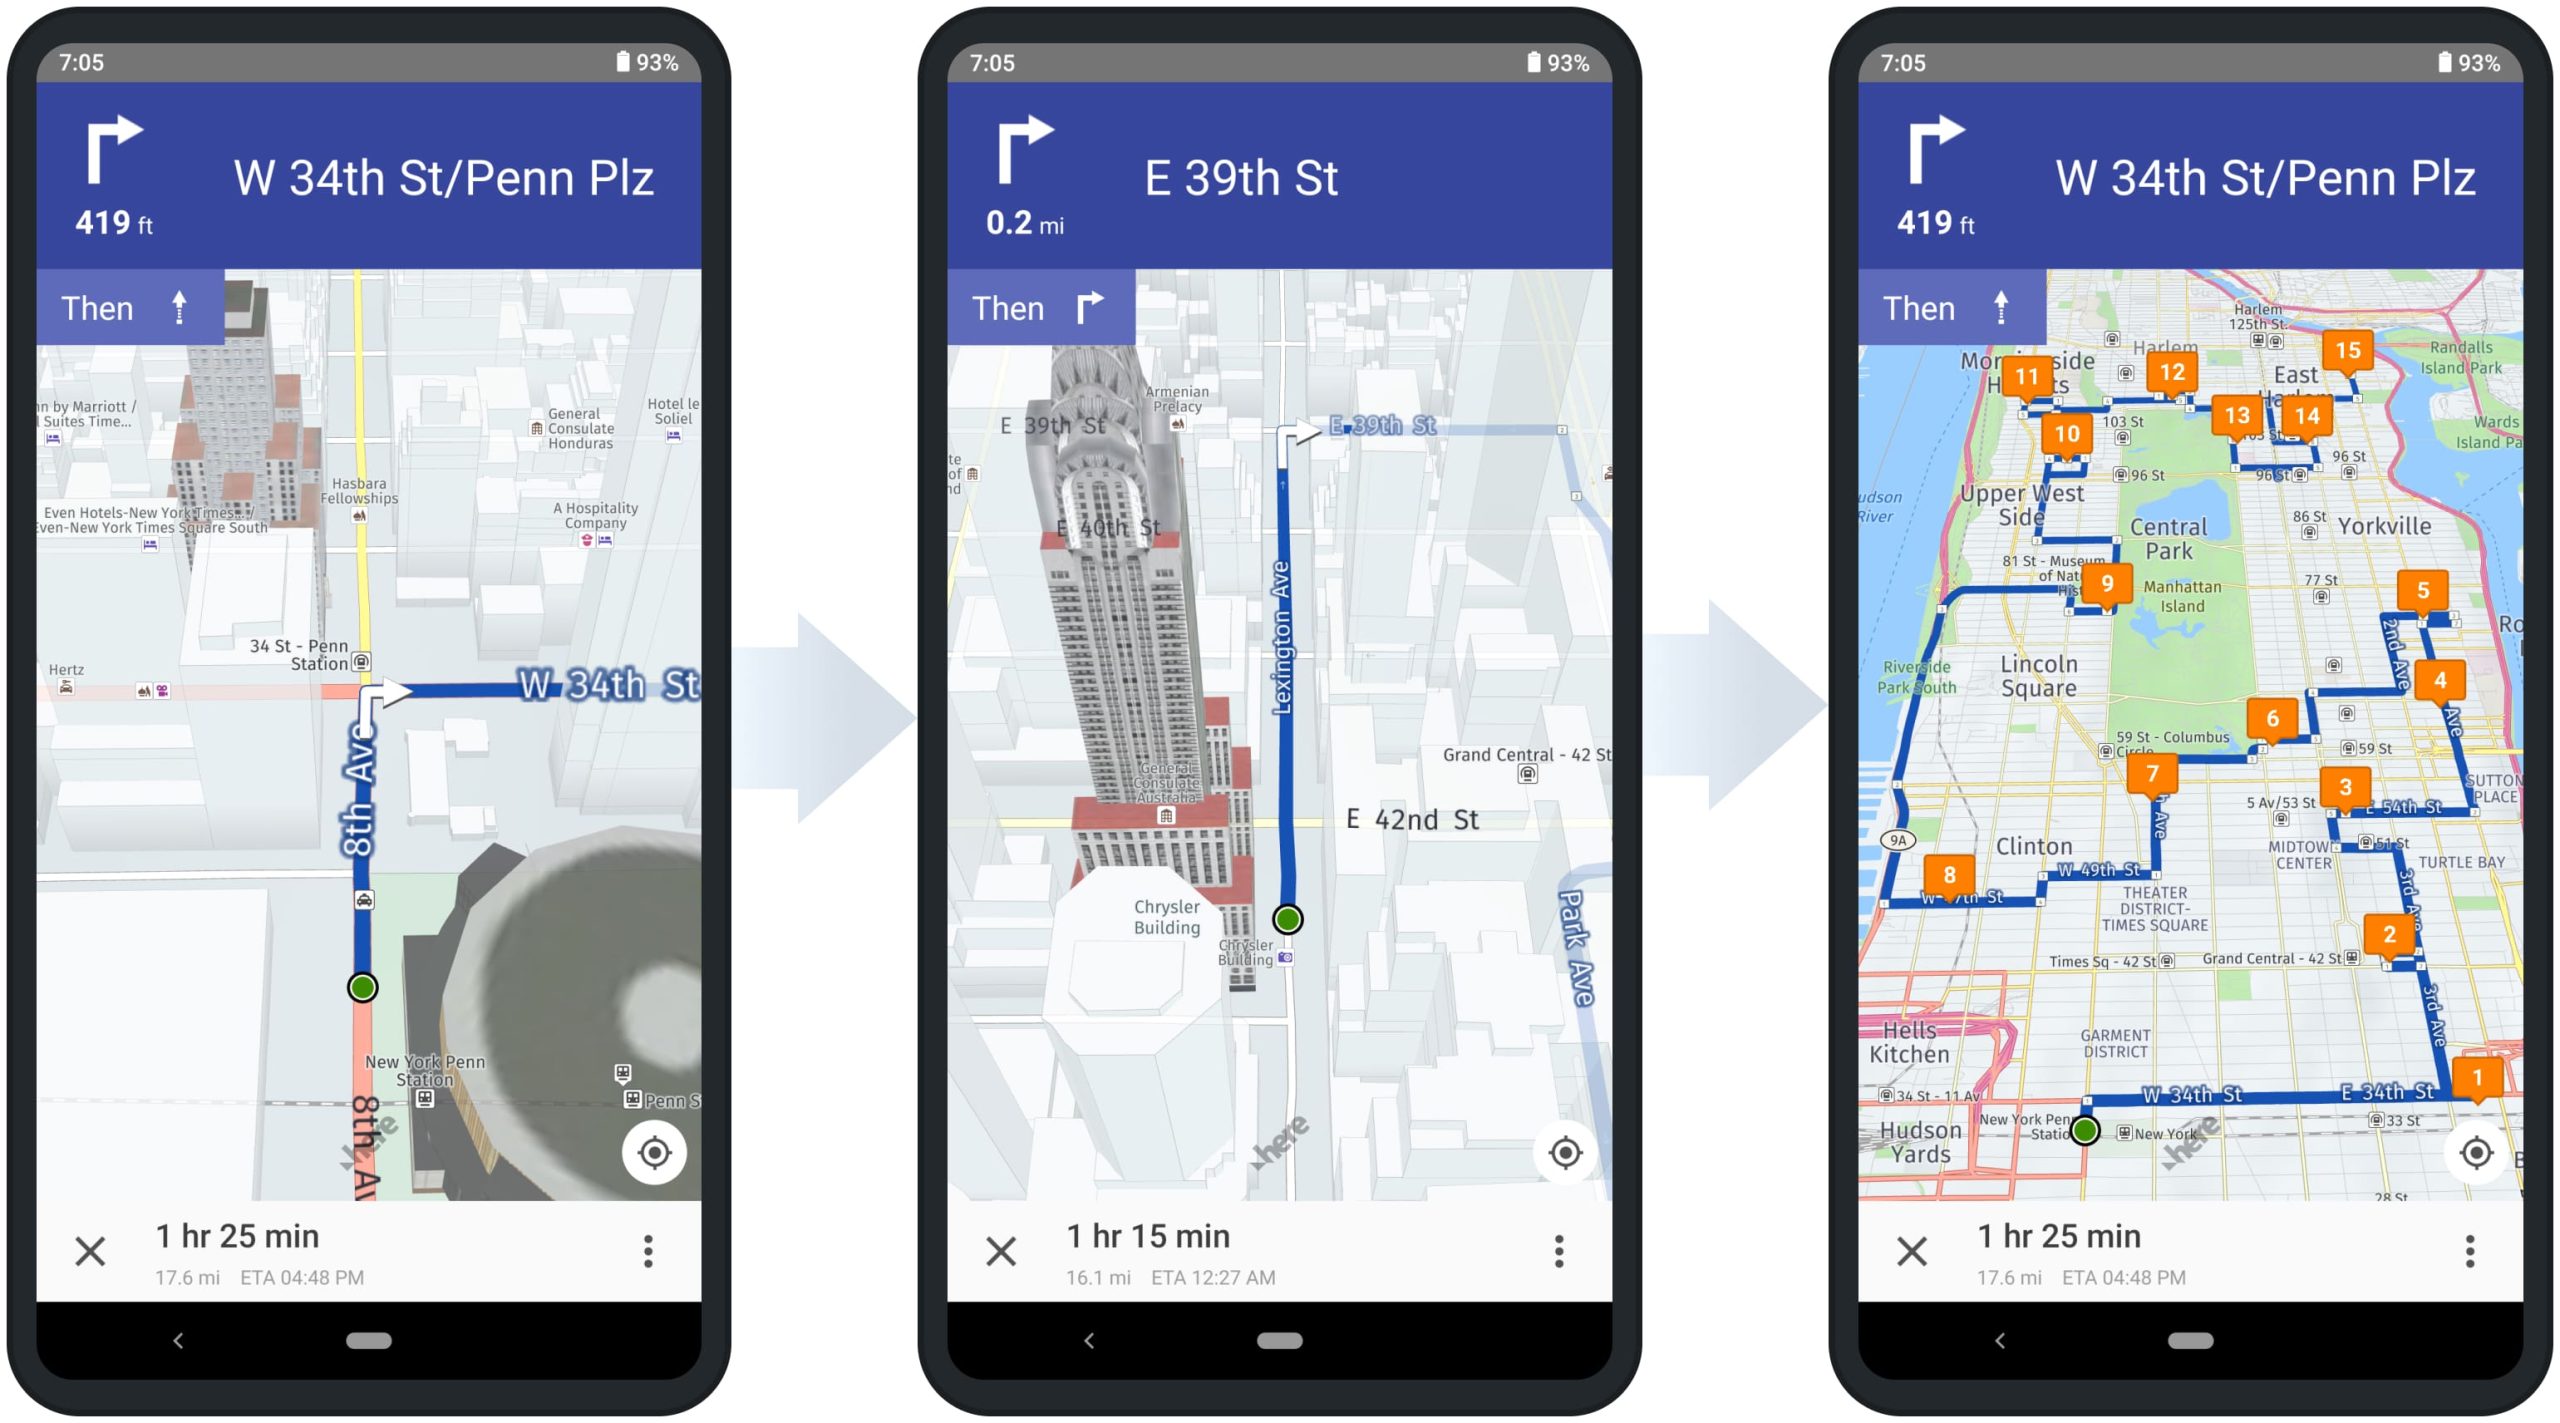 Using the Android Route Planner app integrated GPS navigation with live traffic, dynamic ETAs, voice directions, and adjustable maps.